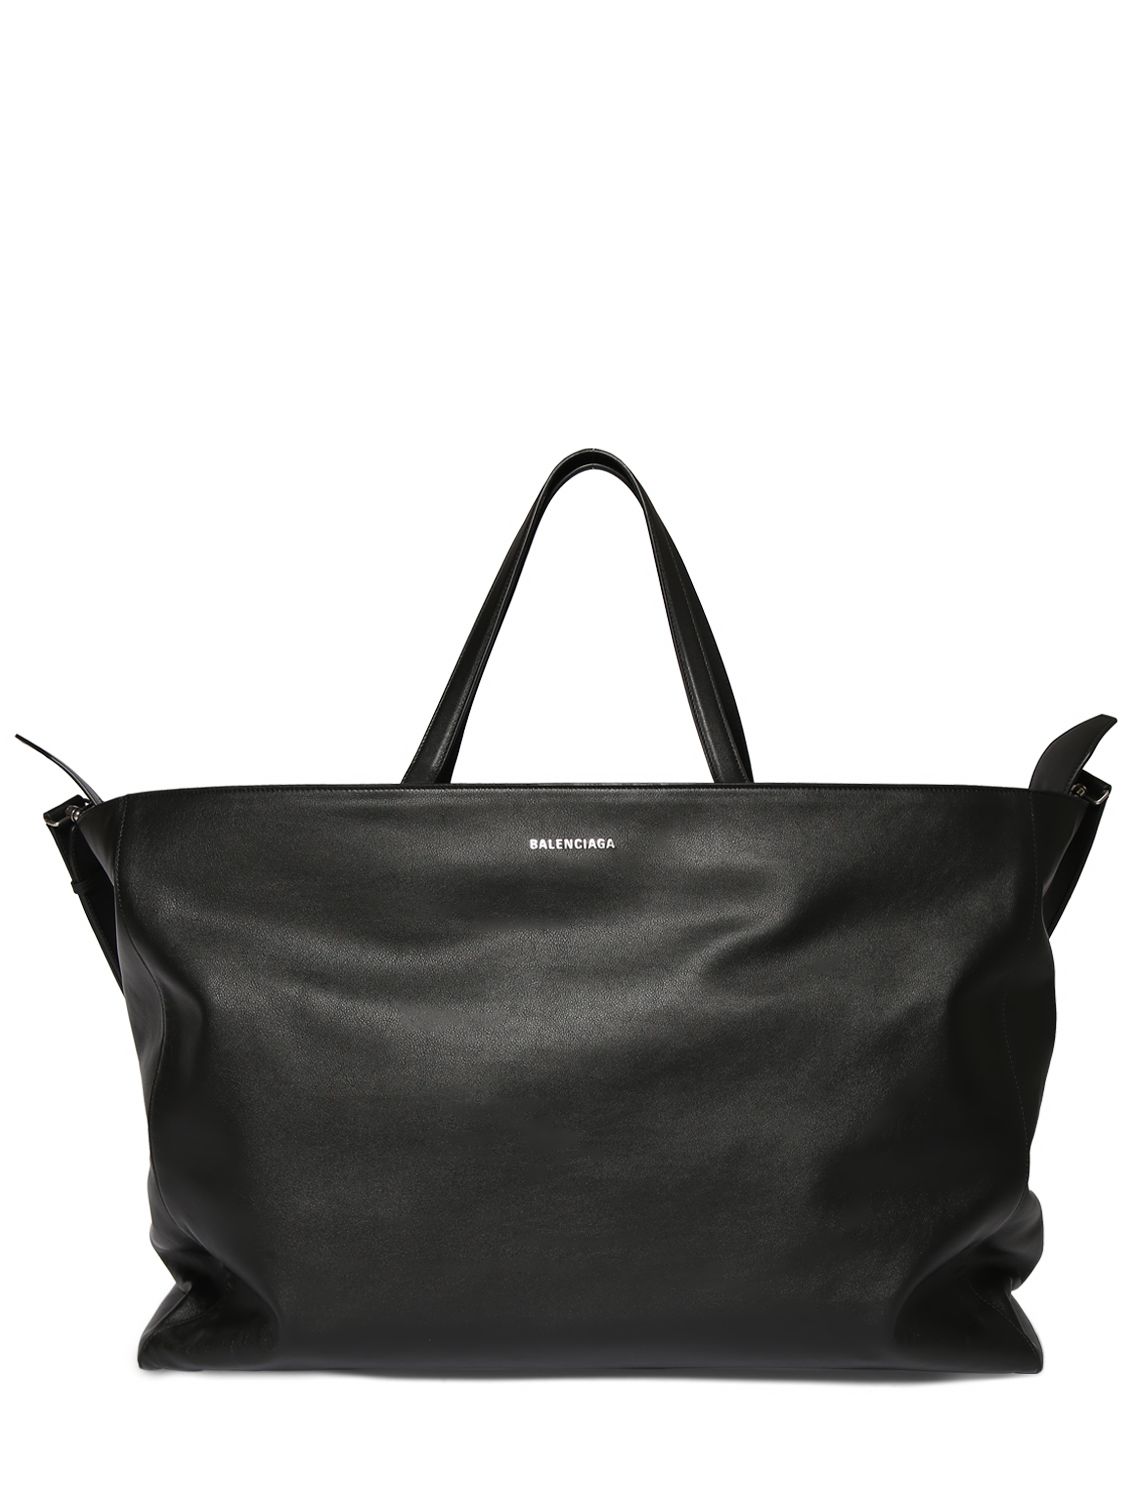 Xl Carryall Leather Tote Bag